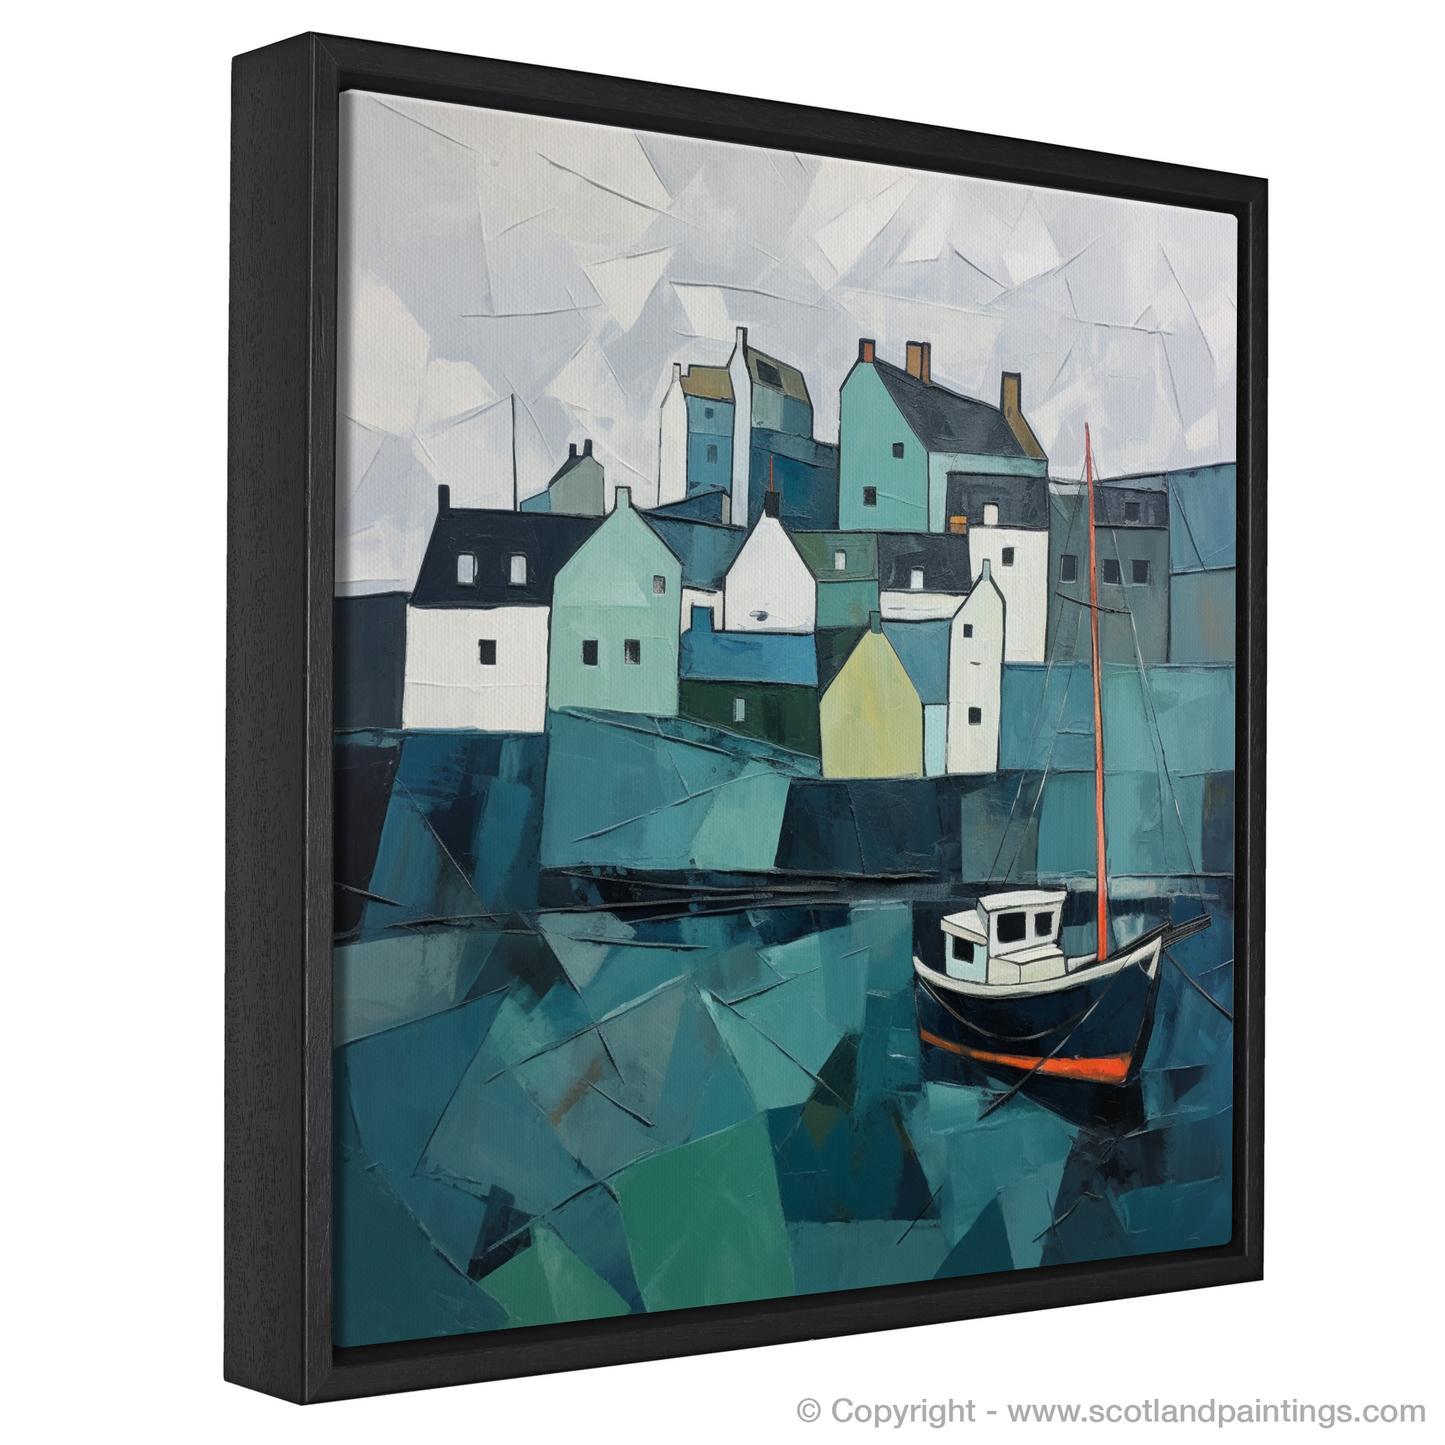 Storm over Portsoy: A Minimalist Maritime Vision